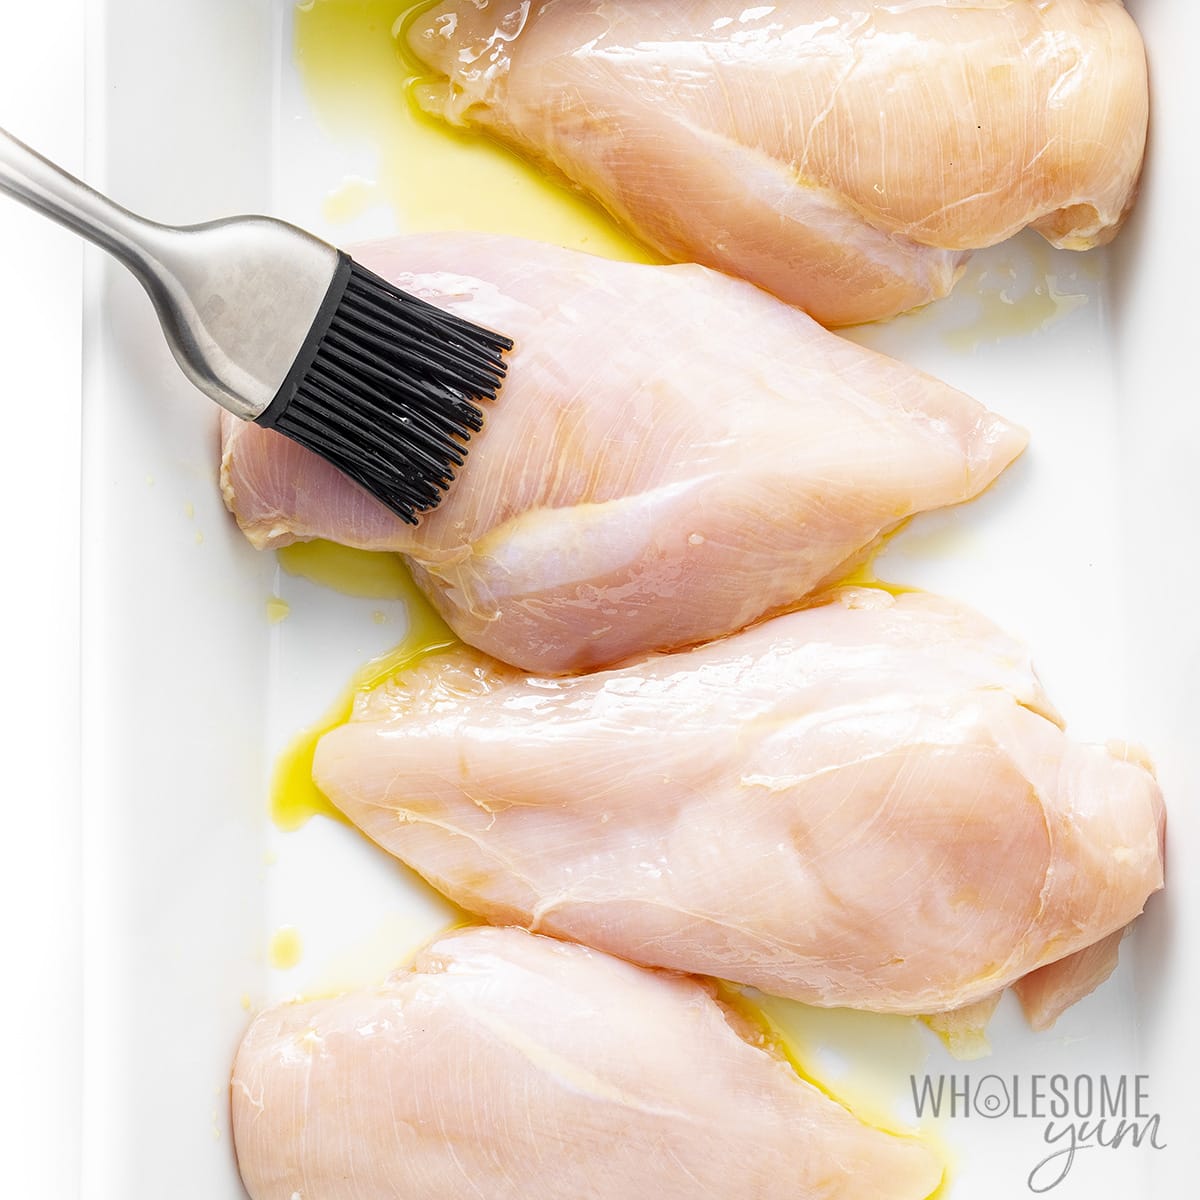 Chicken breasts basted with oil.